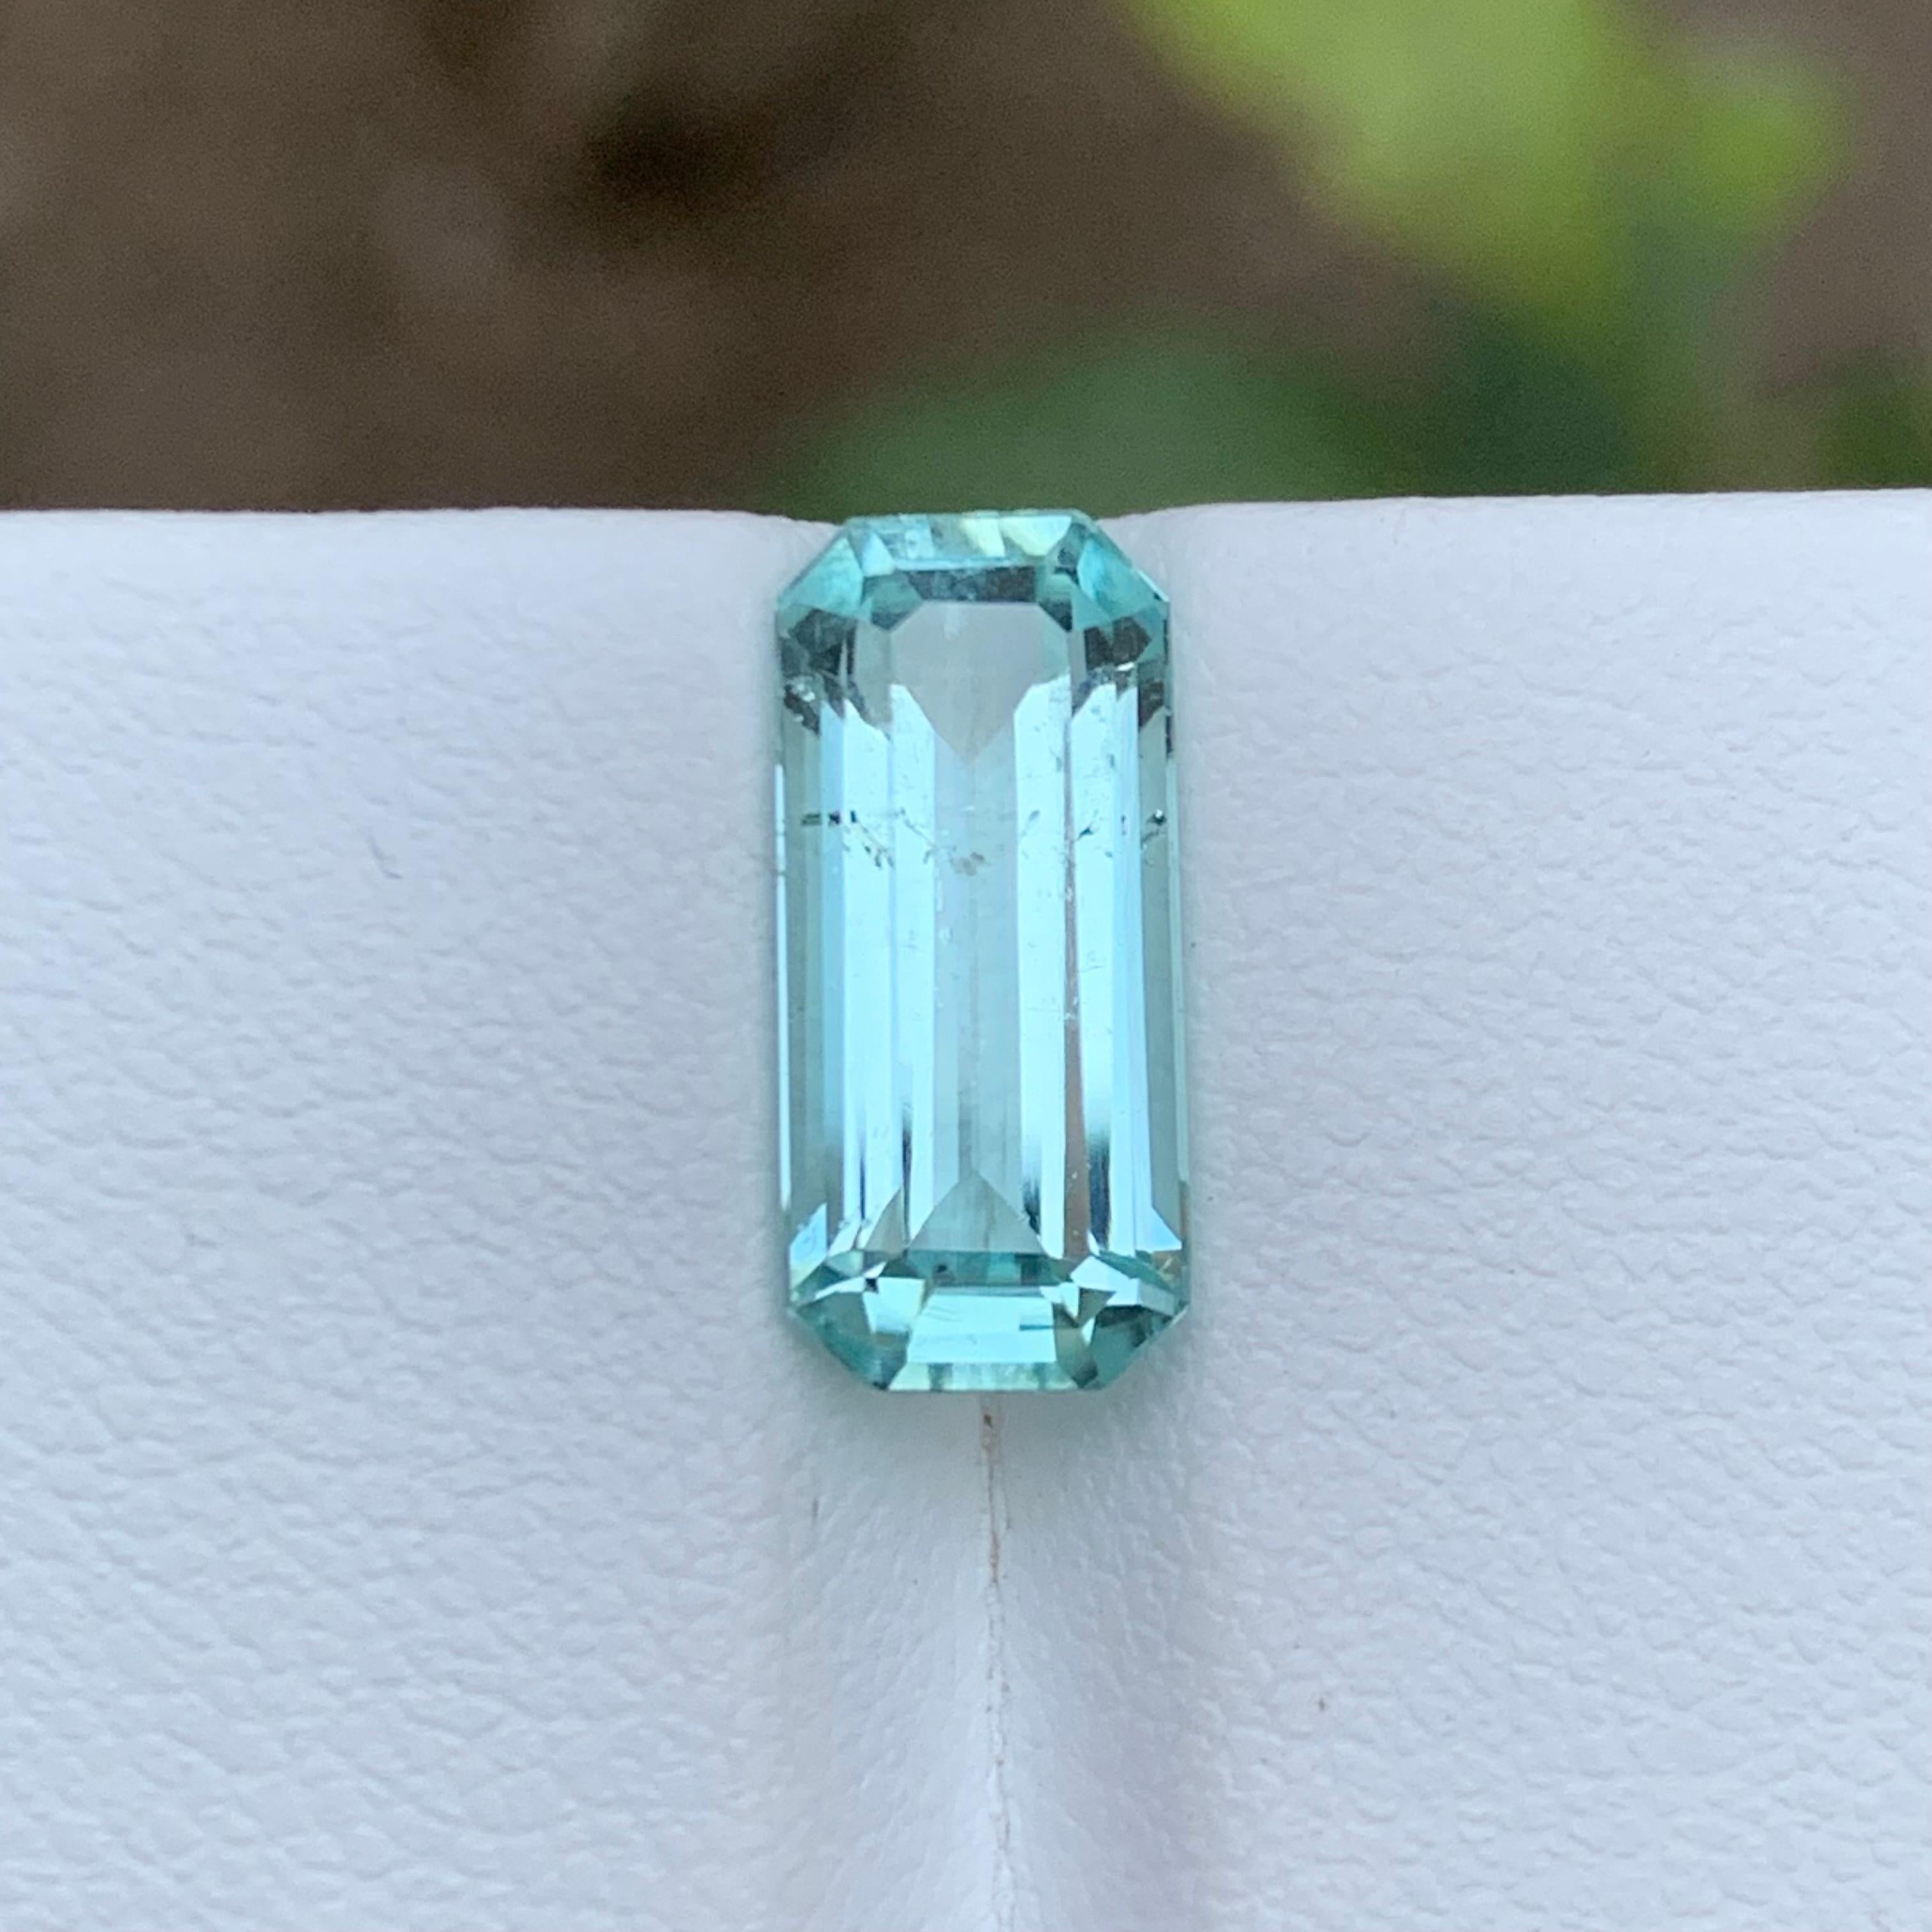 GEMSTONE TYPE: Tourmaline
PIECE(S): 1
WEIGHT: 3.65 Carats
SHAPE: Emerald Cut
SIZE (MM): 13.82 x 6.31 x 4.97
COLOR: Seafoam
CLARITY: Slightly Included 
TREATMENT: None
ORIGIN: Afghanistan
CERTIFICATE: On demand

Elevate your jewelry collection with